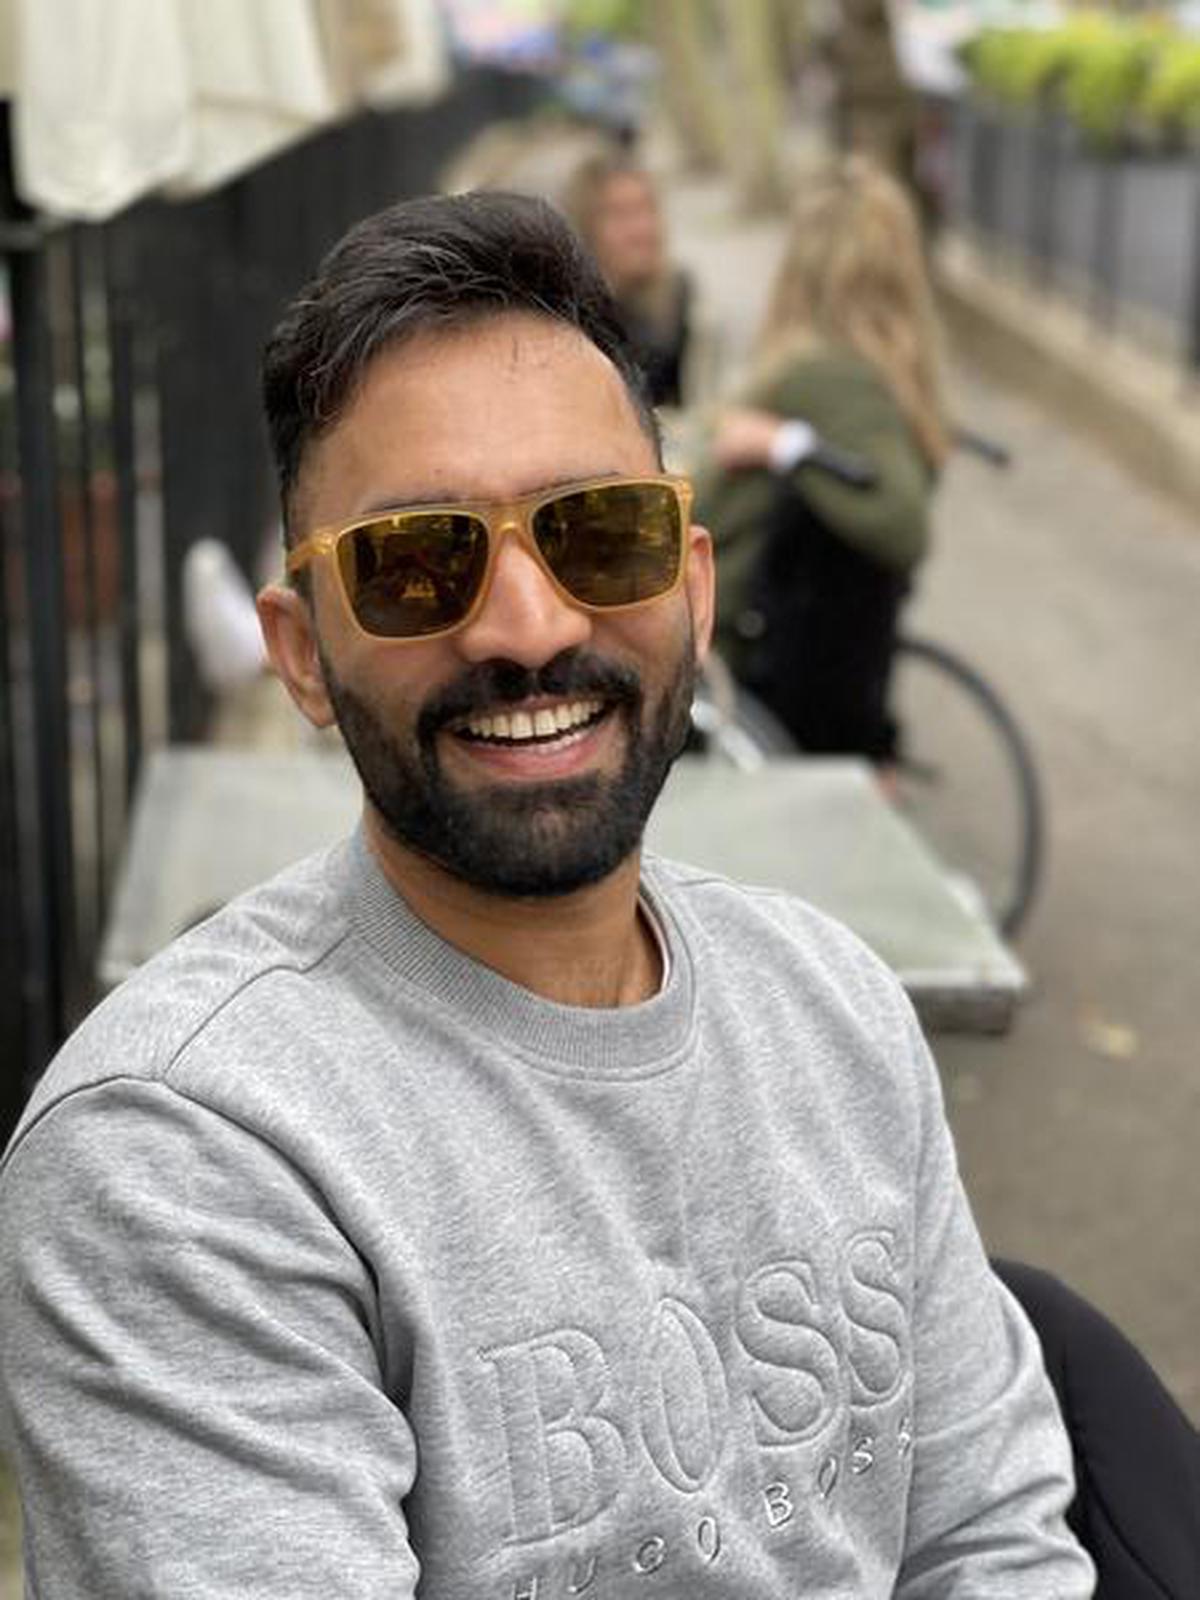 Dinesh Karthik on his sports NFT: ‘I wanted fans to relive the moment around my last-ball six’